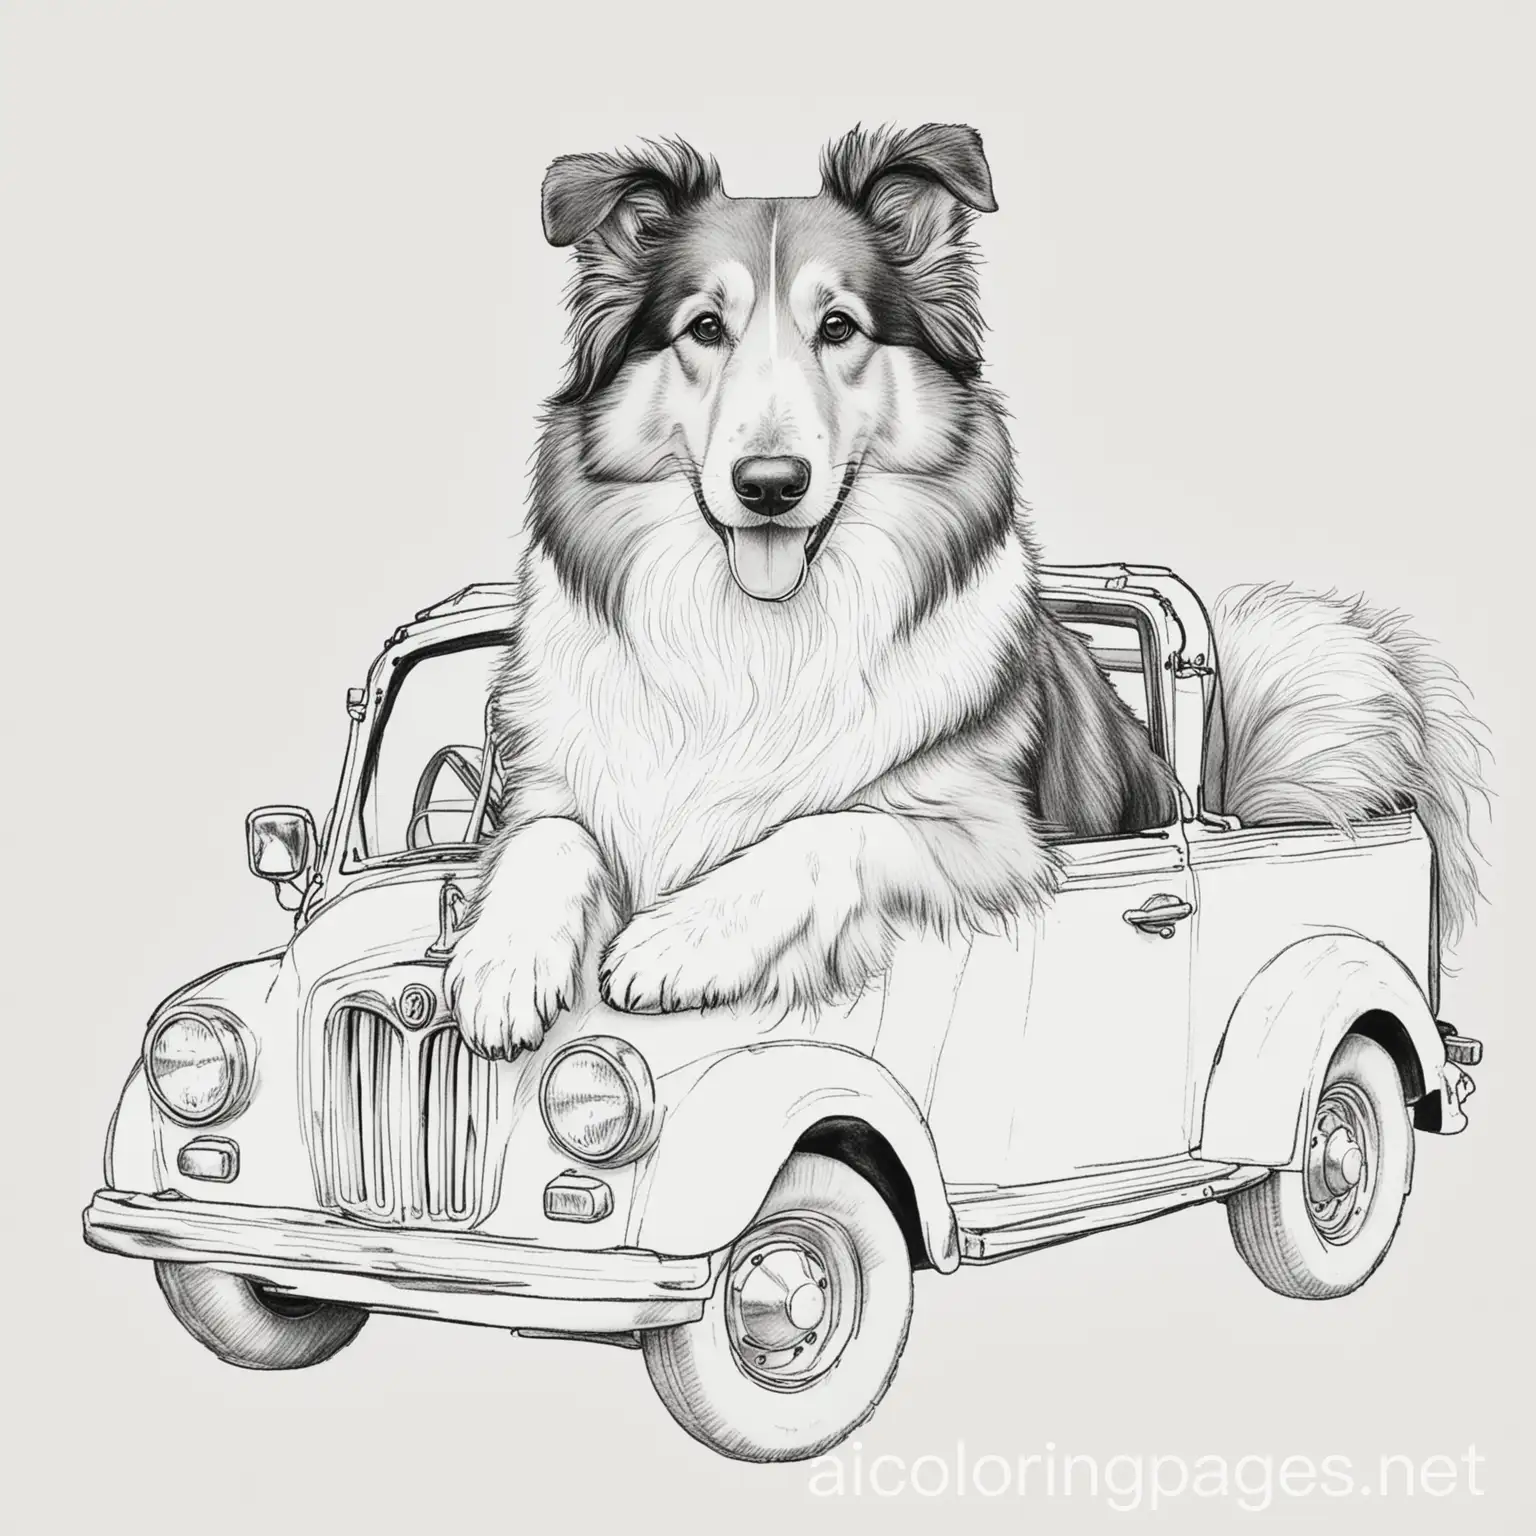 A rough collie riding in a car, Coloring Page, black and white, line art, white background, Simplicity, Ample White Space.